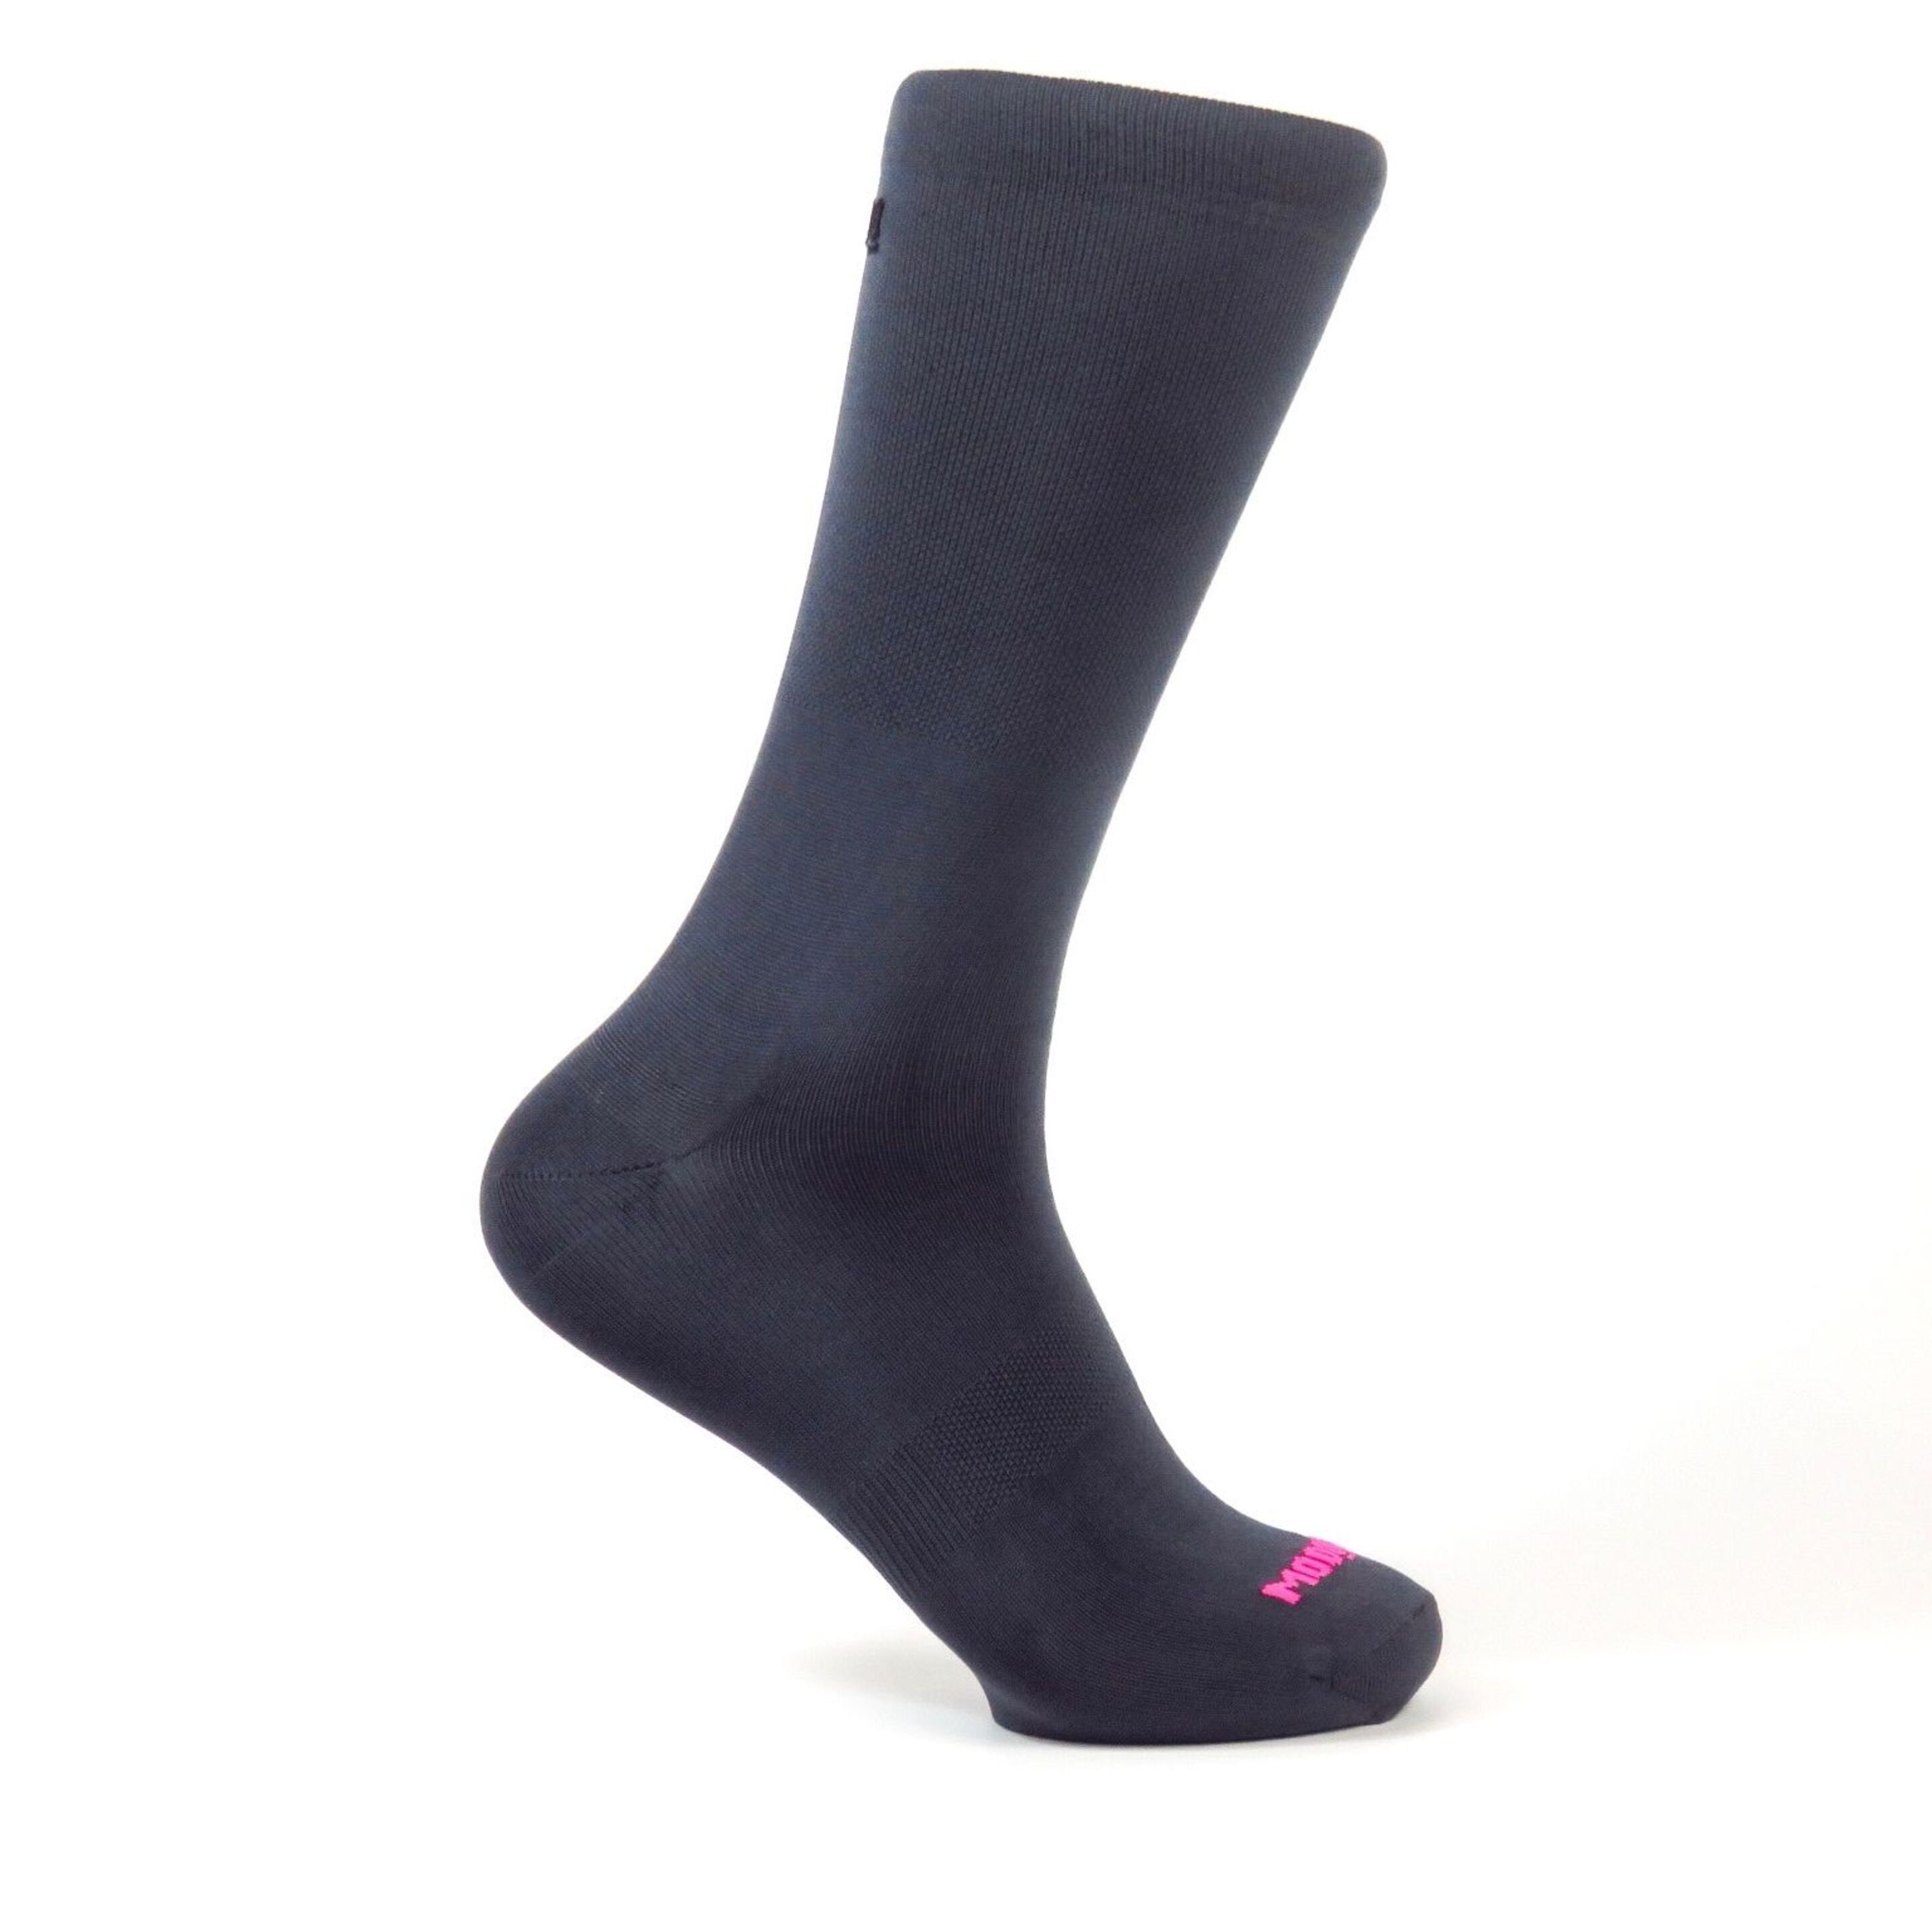 Calcetines Ciclismo Mooquer Classy Pinkgrey